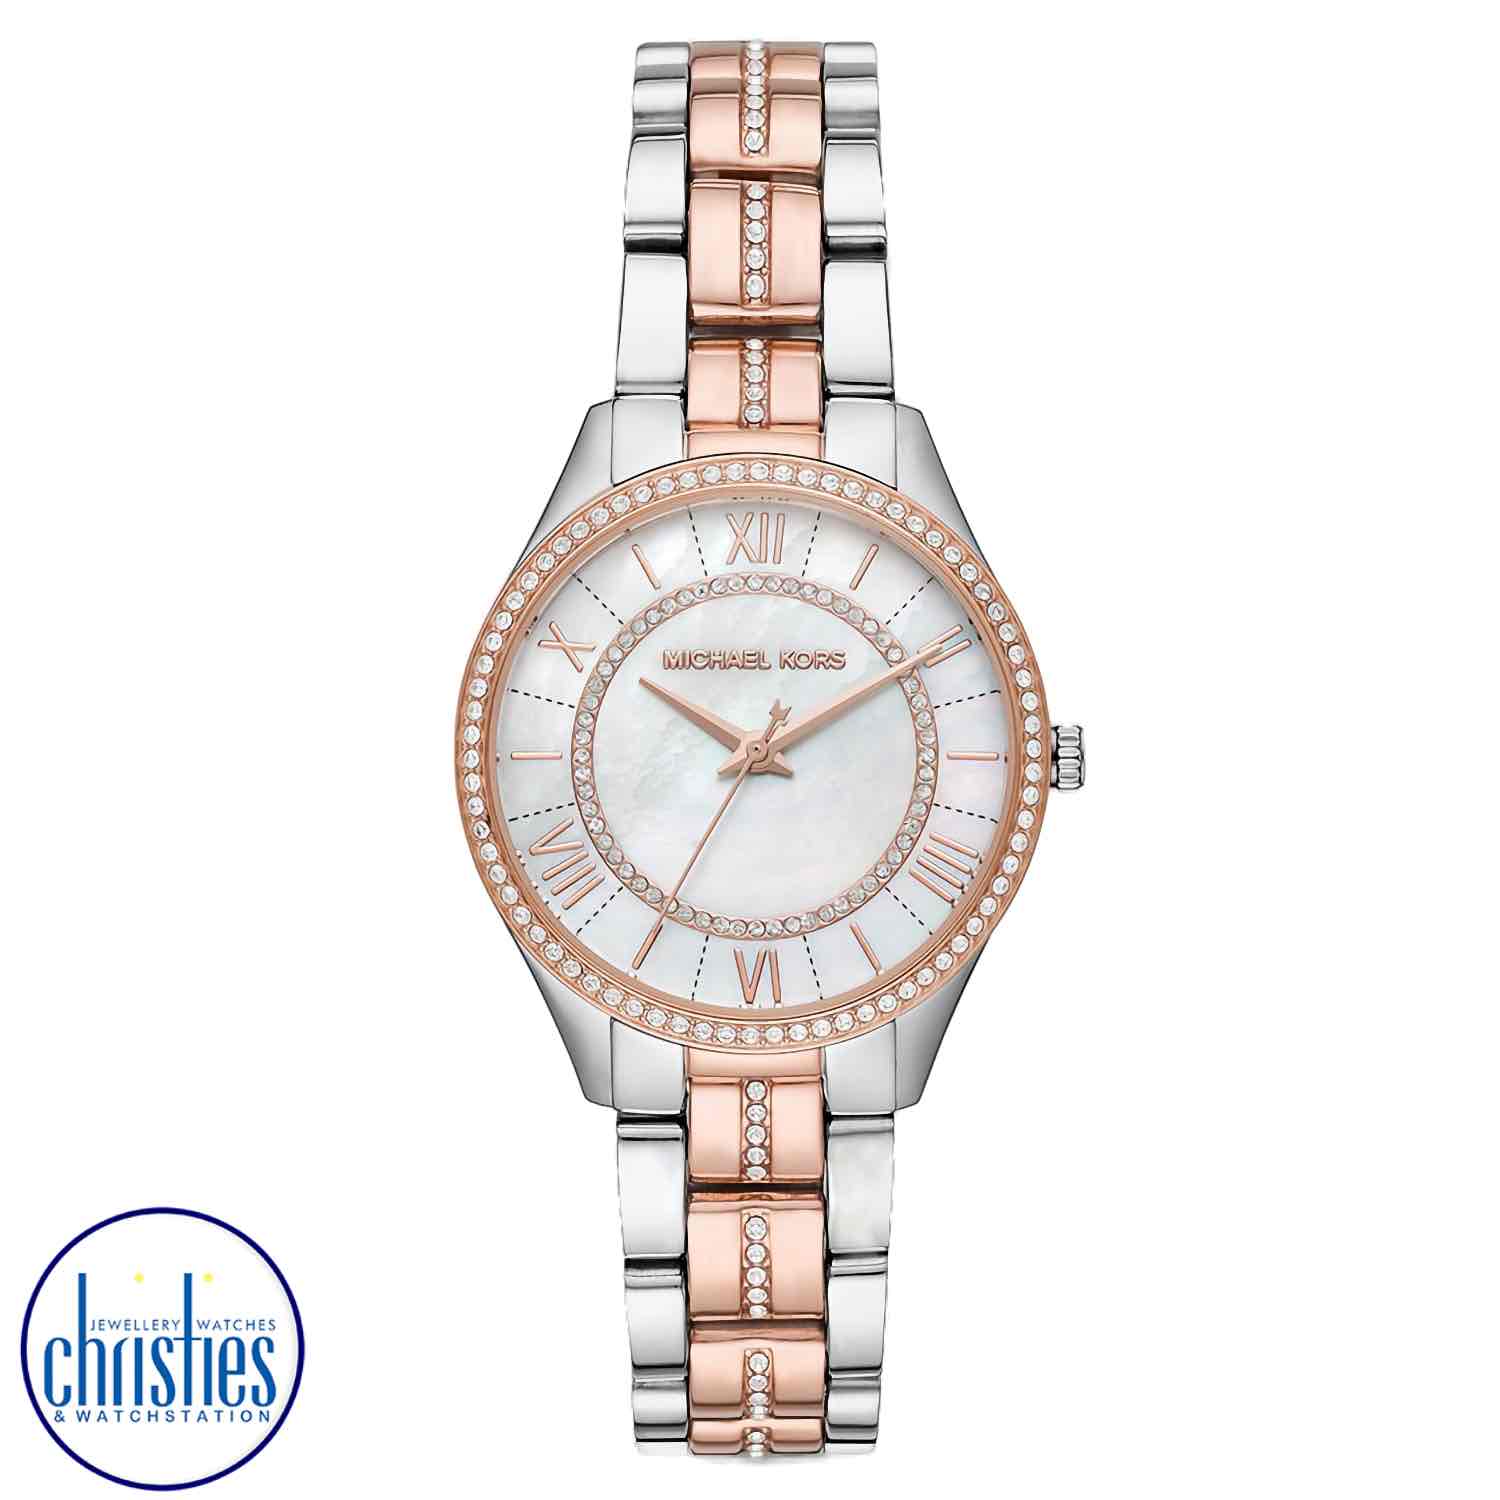 MK3979 Michael Kors Lauryn Three-Hand Two-Tone Stainless Steel Watch. MK3979 Michael Kors Lauryn Three-Hand Two-Tone Stainless Steel WatchAfterpay - Split your purchase into 4 instalments - Pay for your purchase over 4 instalments, due every two weeks.